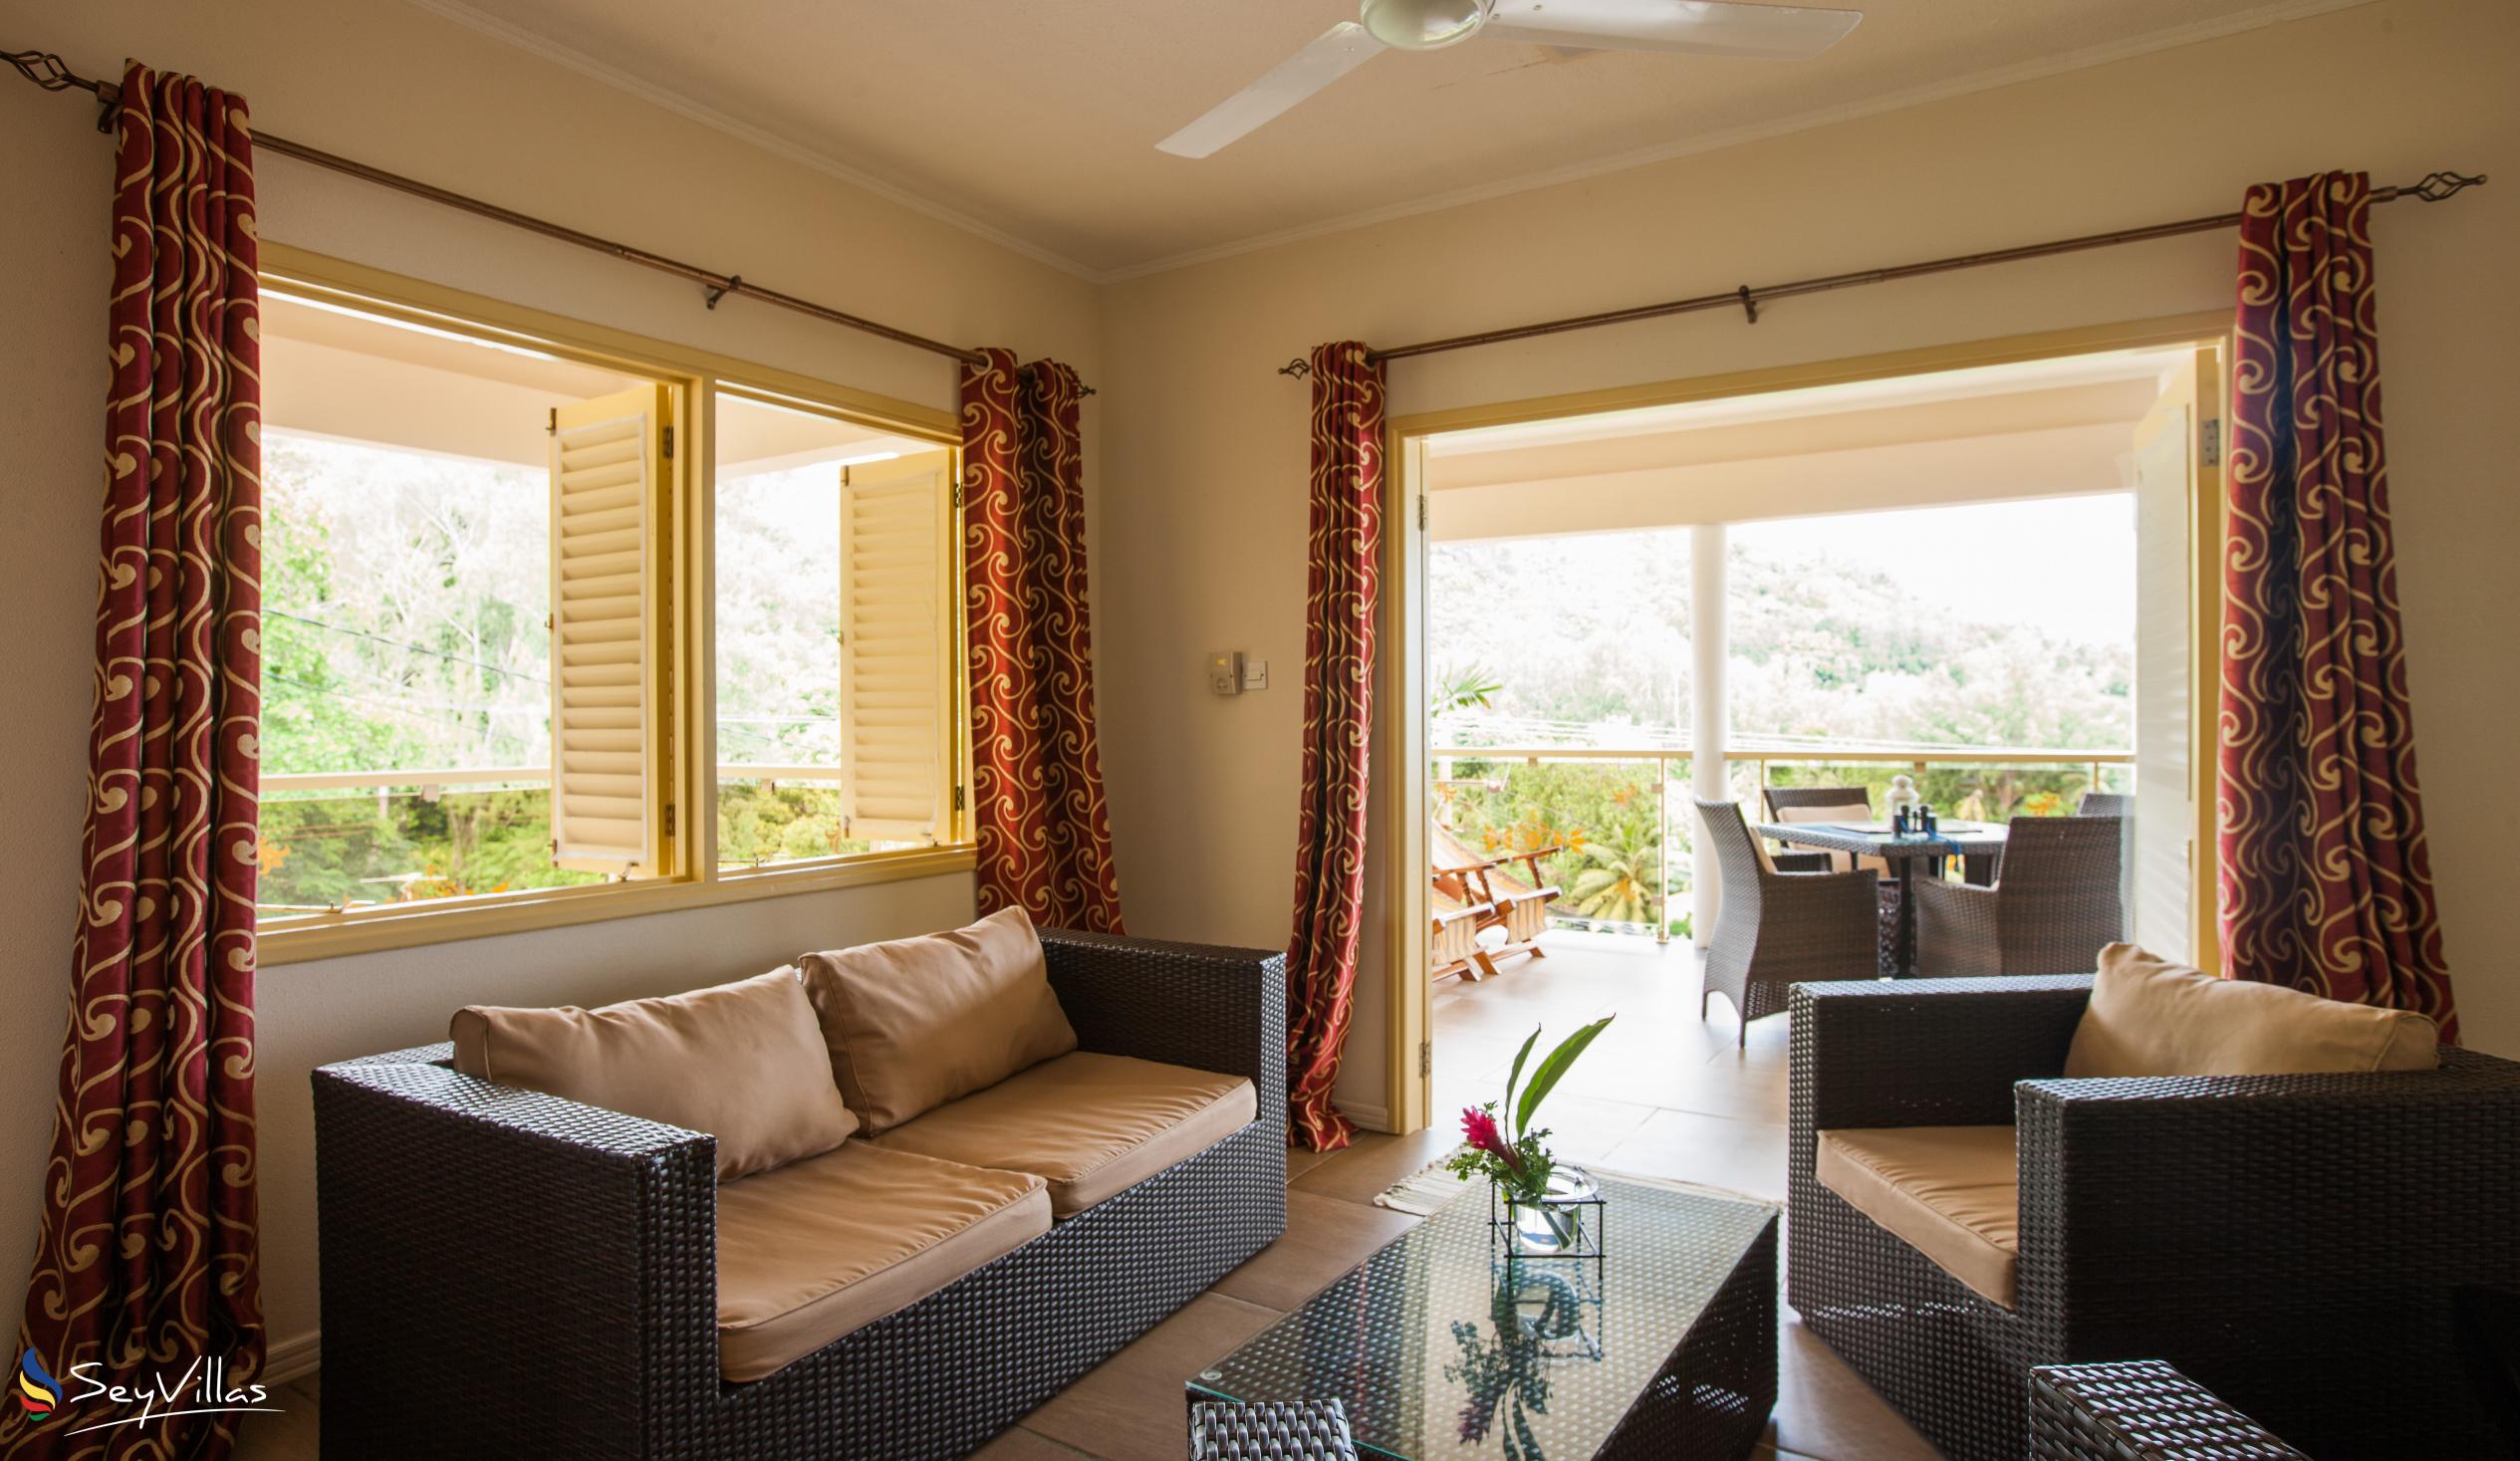 Photo 22: Summer Self Catering - Deluxe Apartment - Praslin (Seychelles)